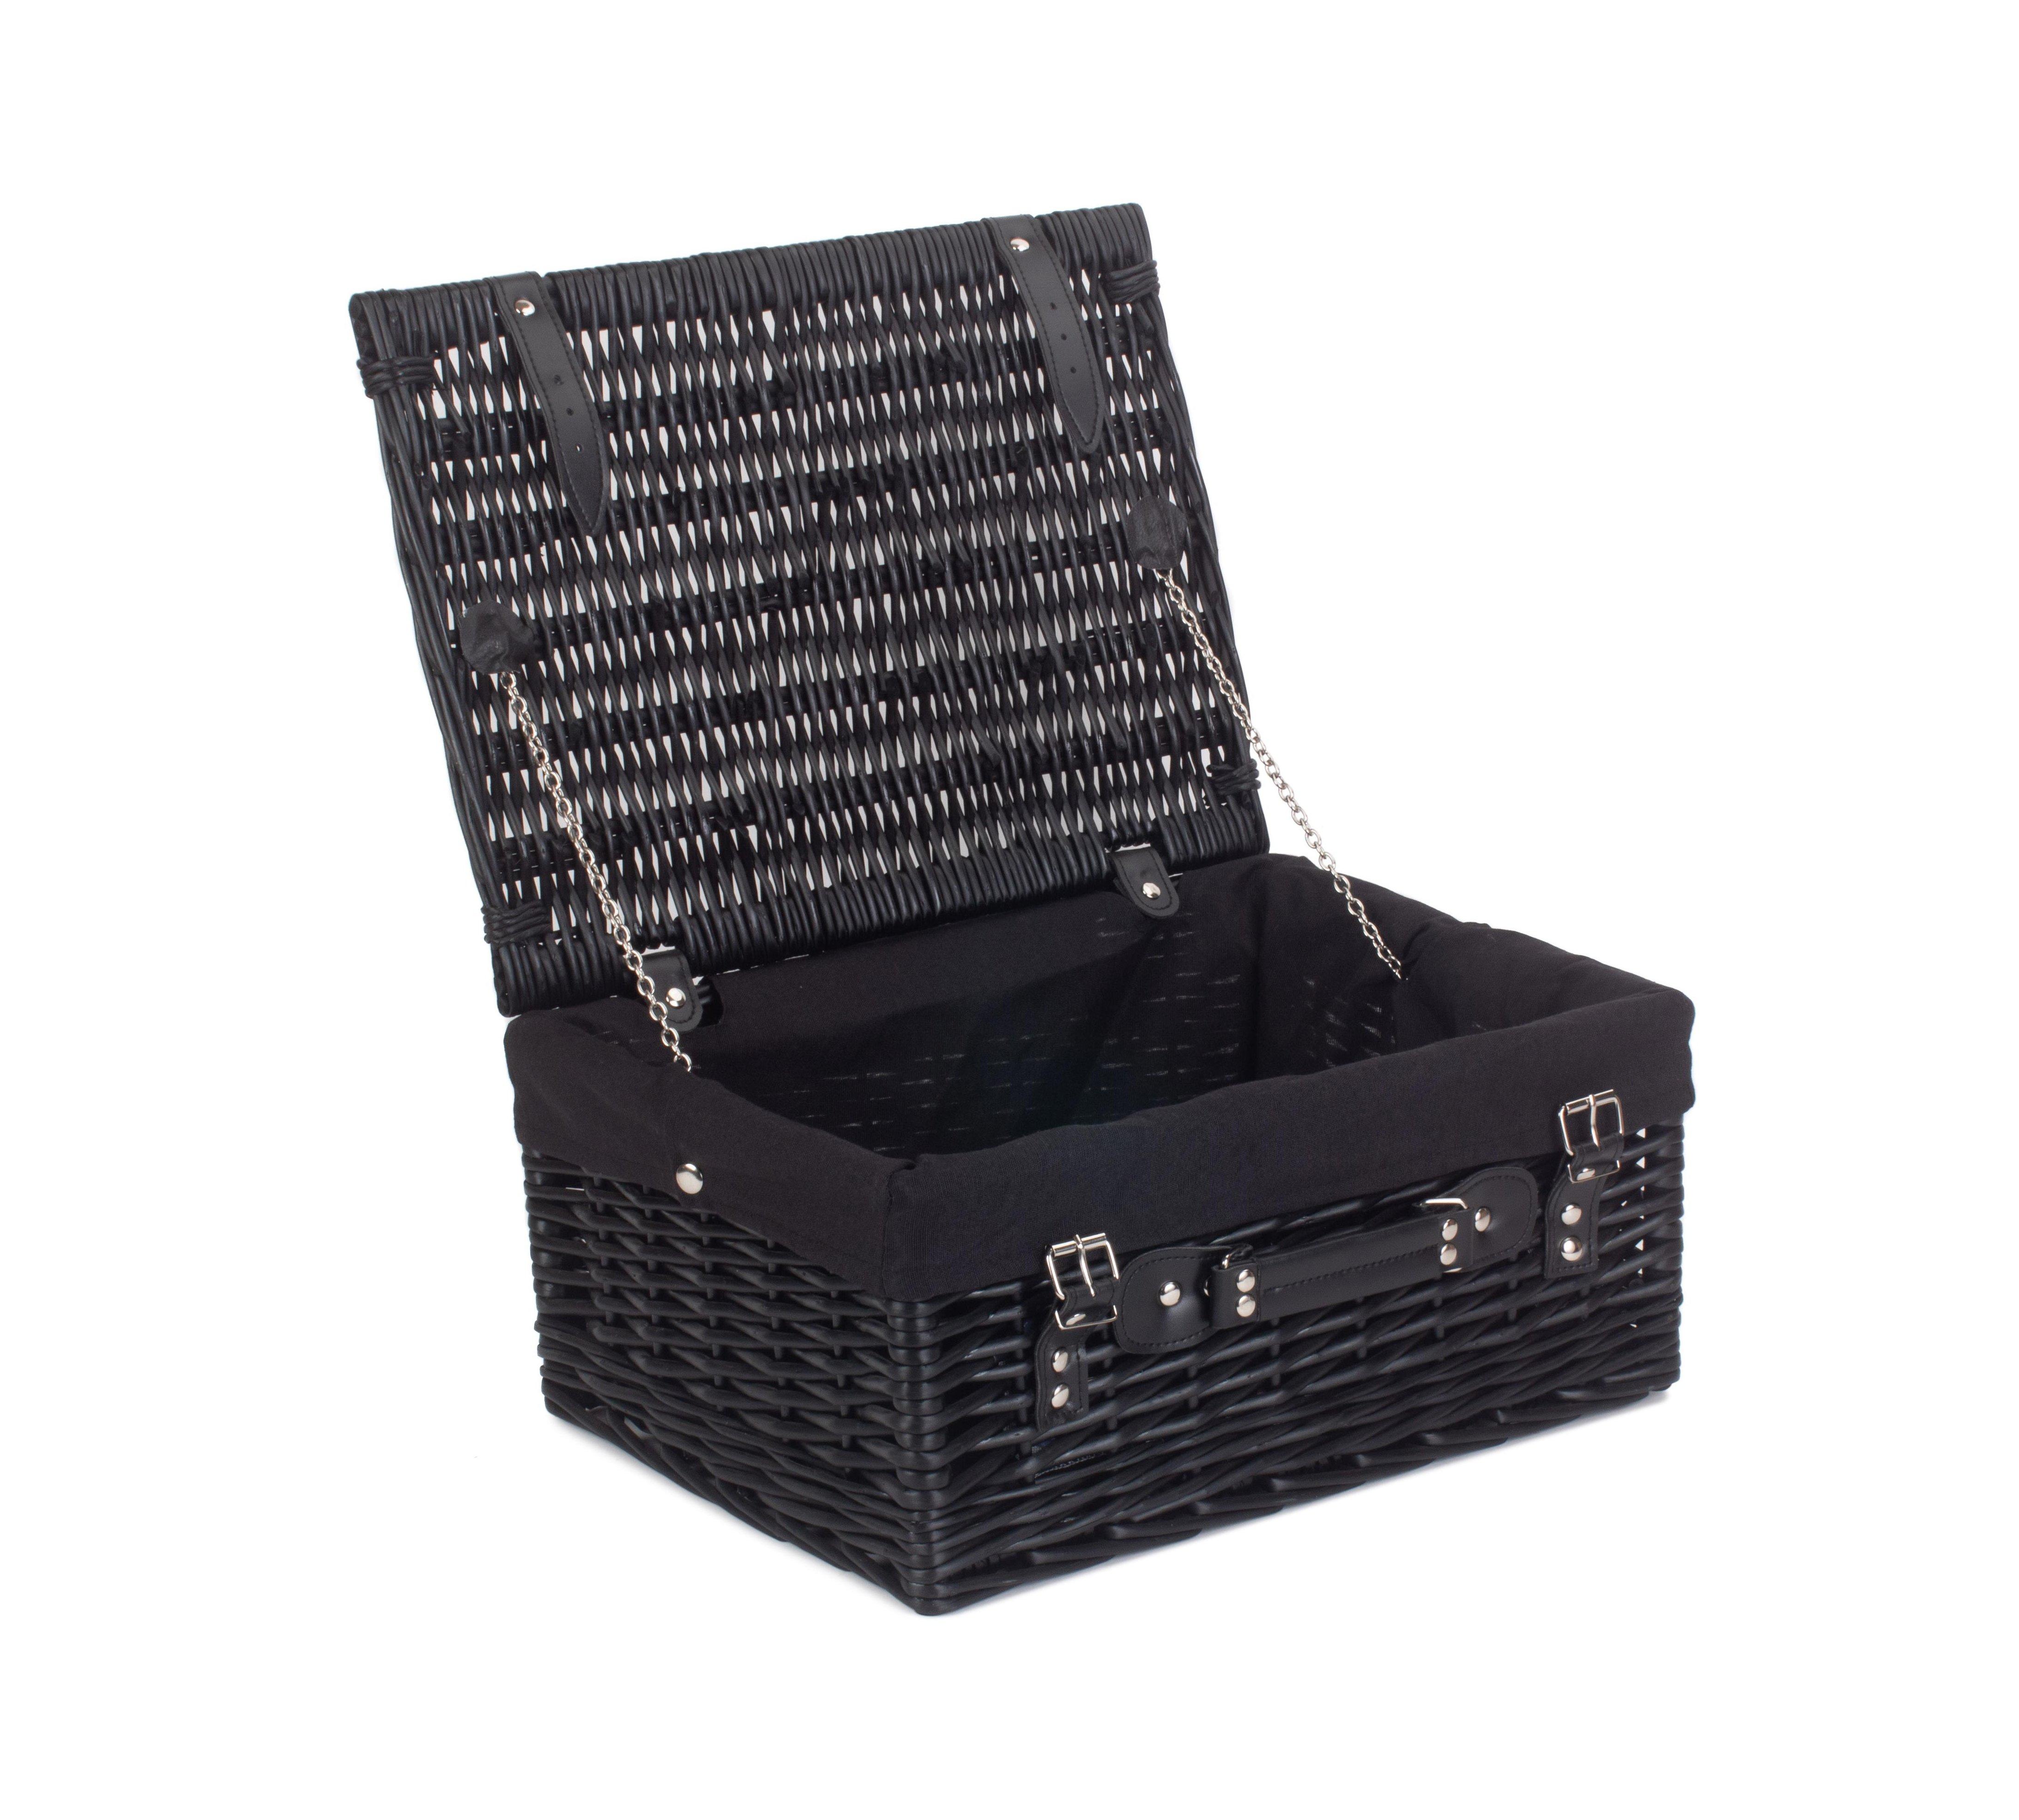 Wicker 40cm Empty Black Willow Picnic Basket with Cotton Lining